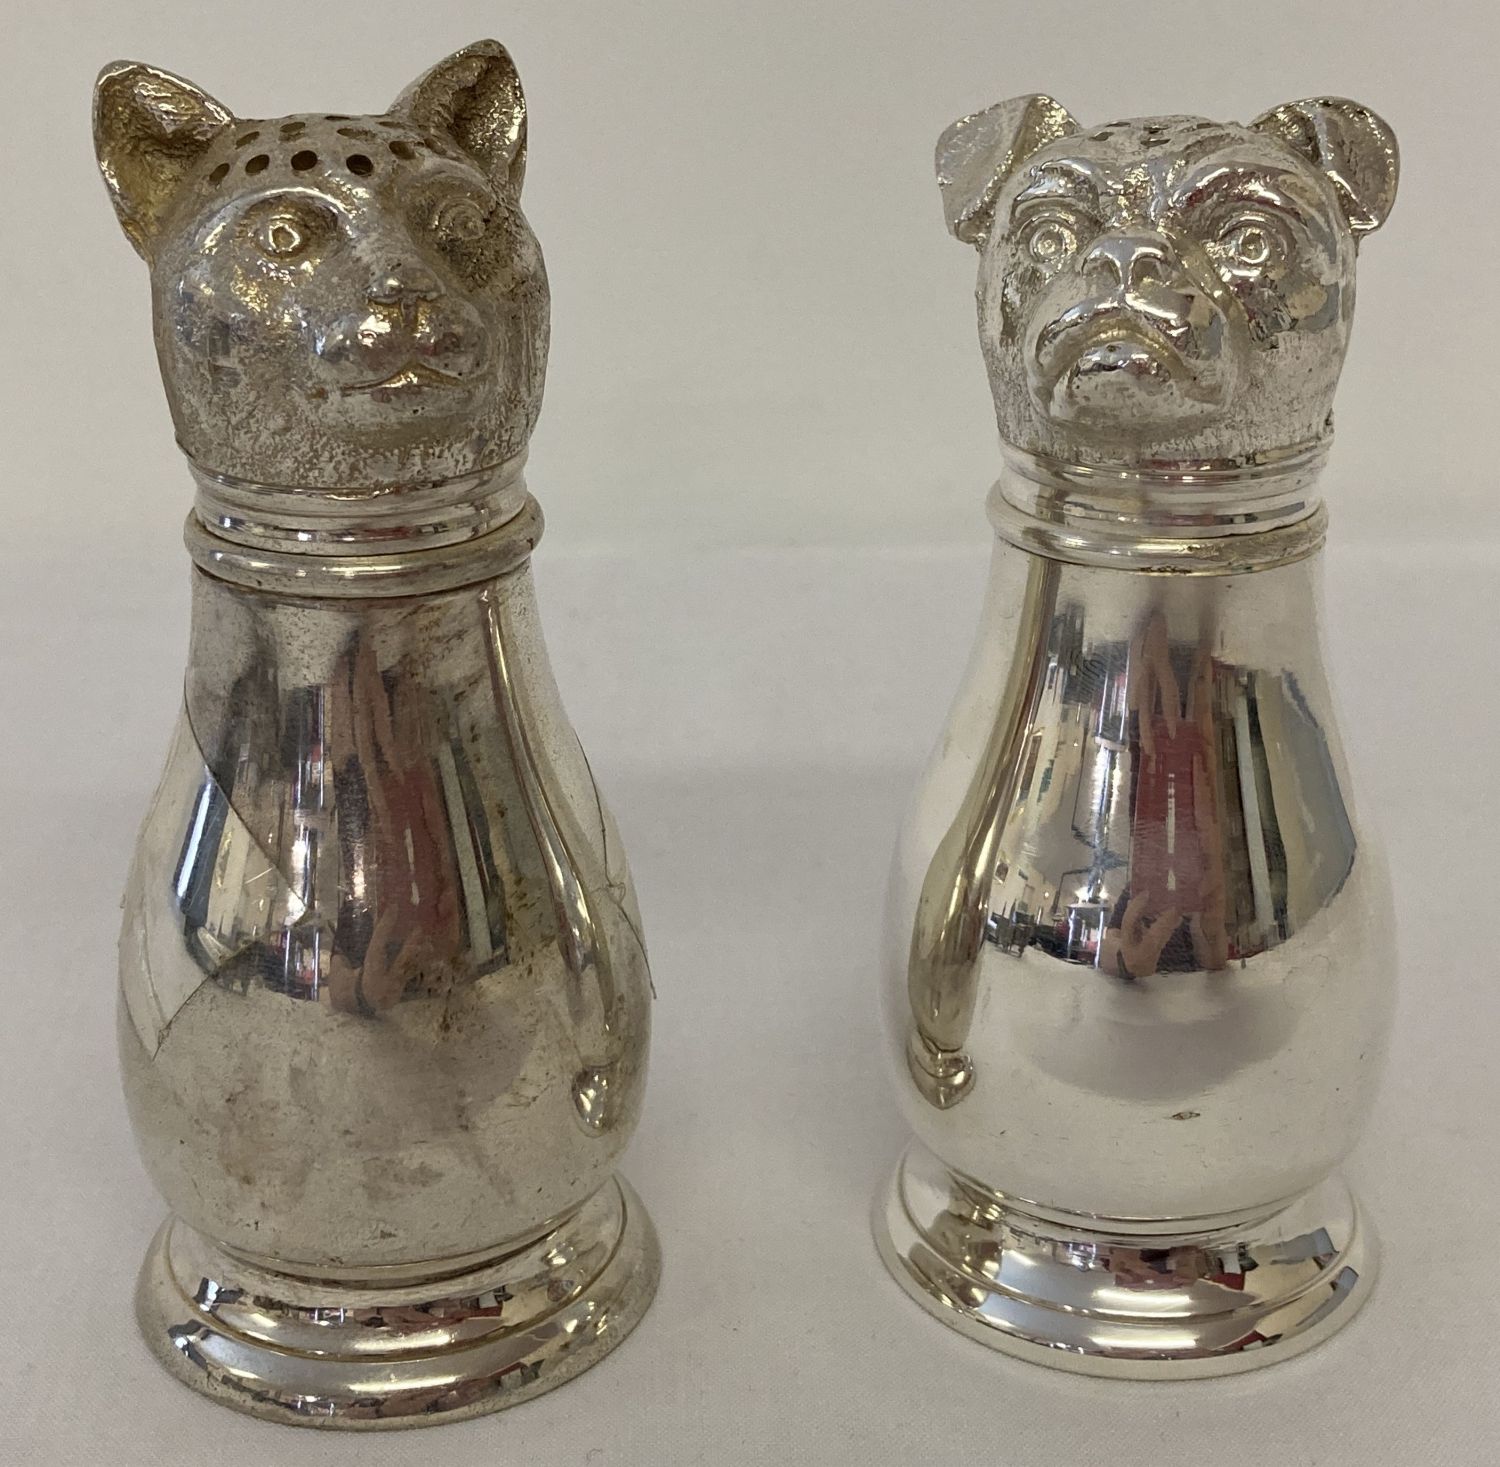 A silver plated novelty cruet with shakers in the form of cat and dog heads.